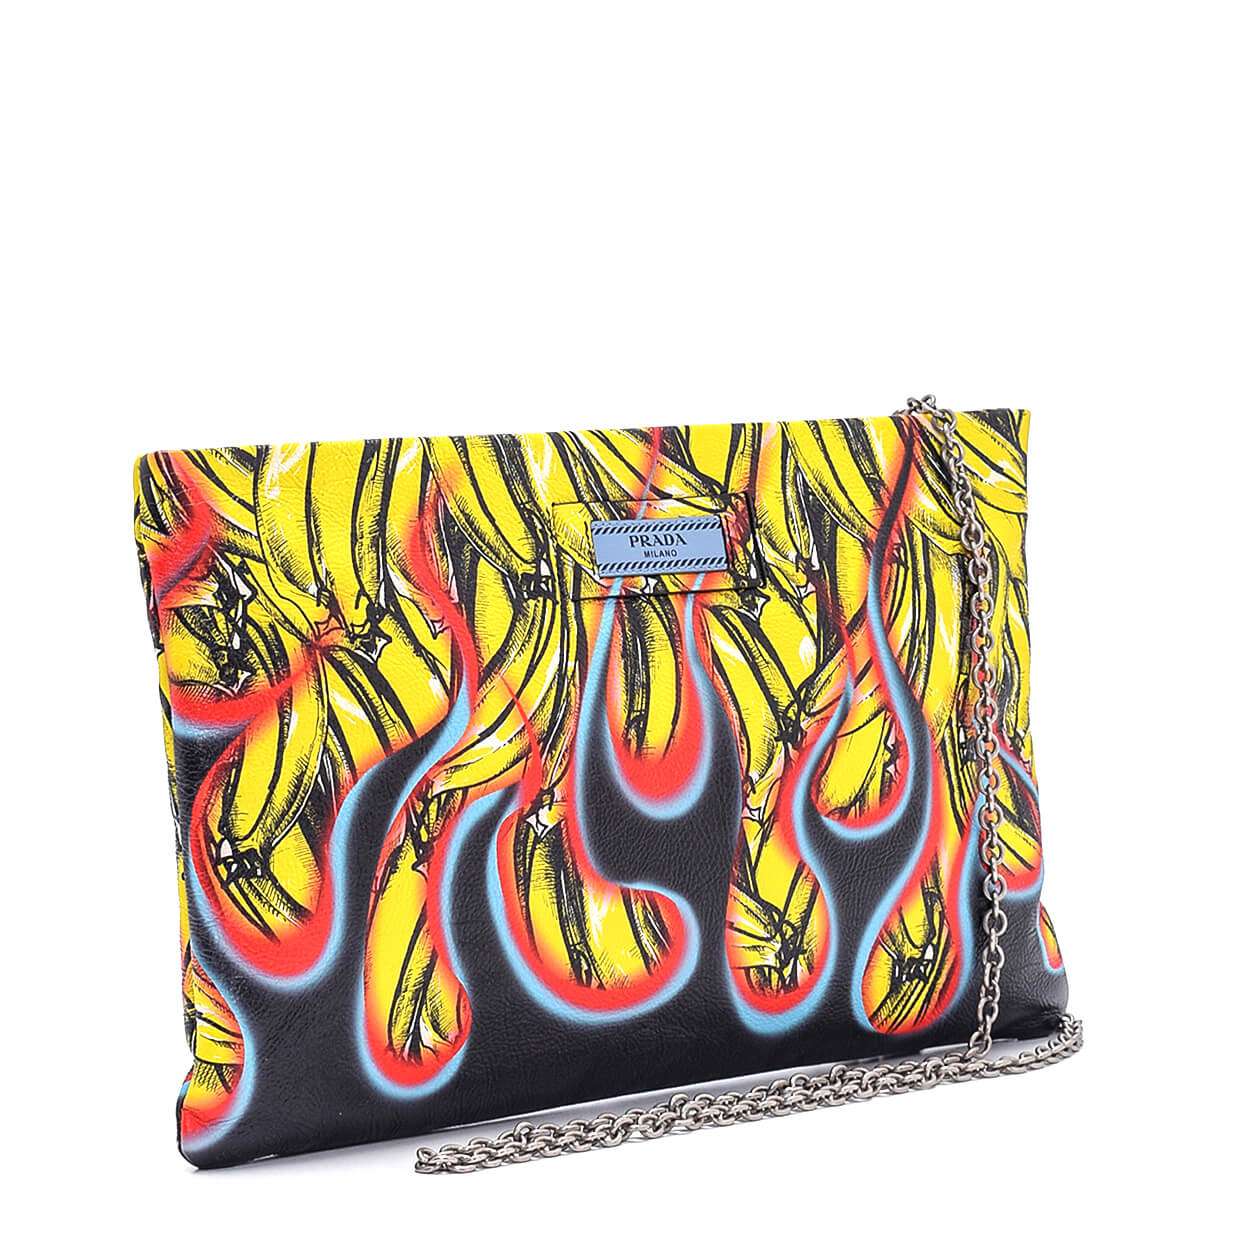 Prada - Multicolor Leather Bananas and Flames Clutch and Messenger Bag